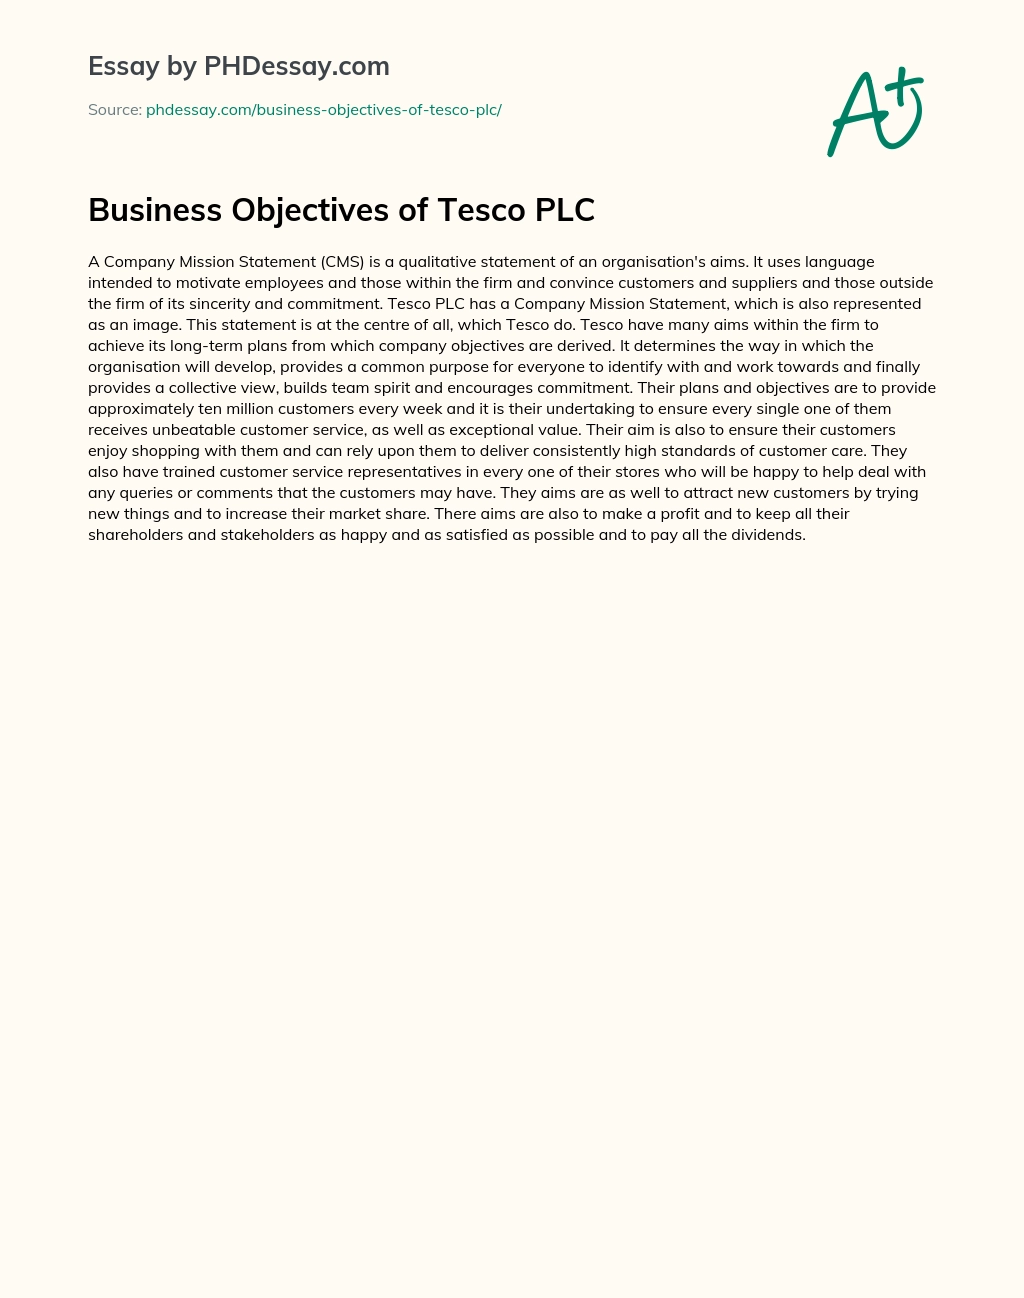 Business Objectives of Tesco PLC essay